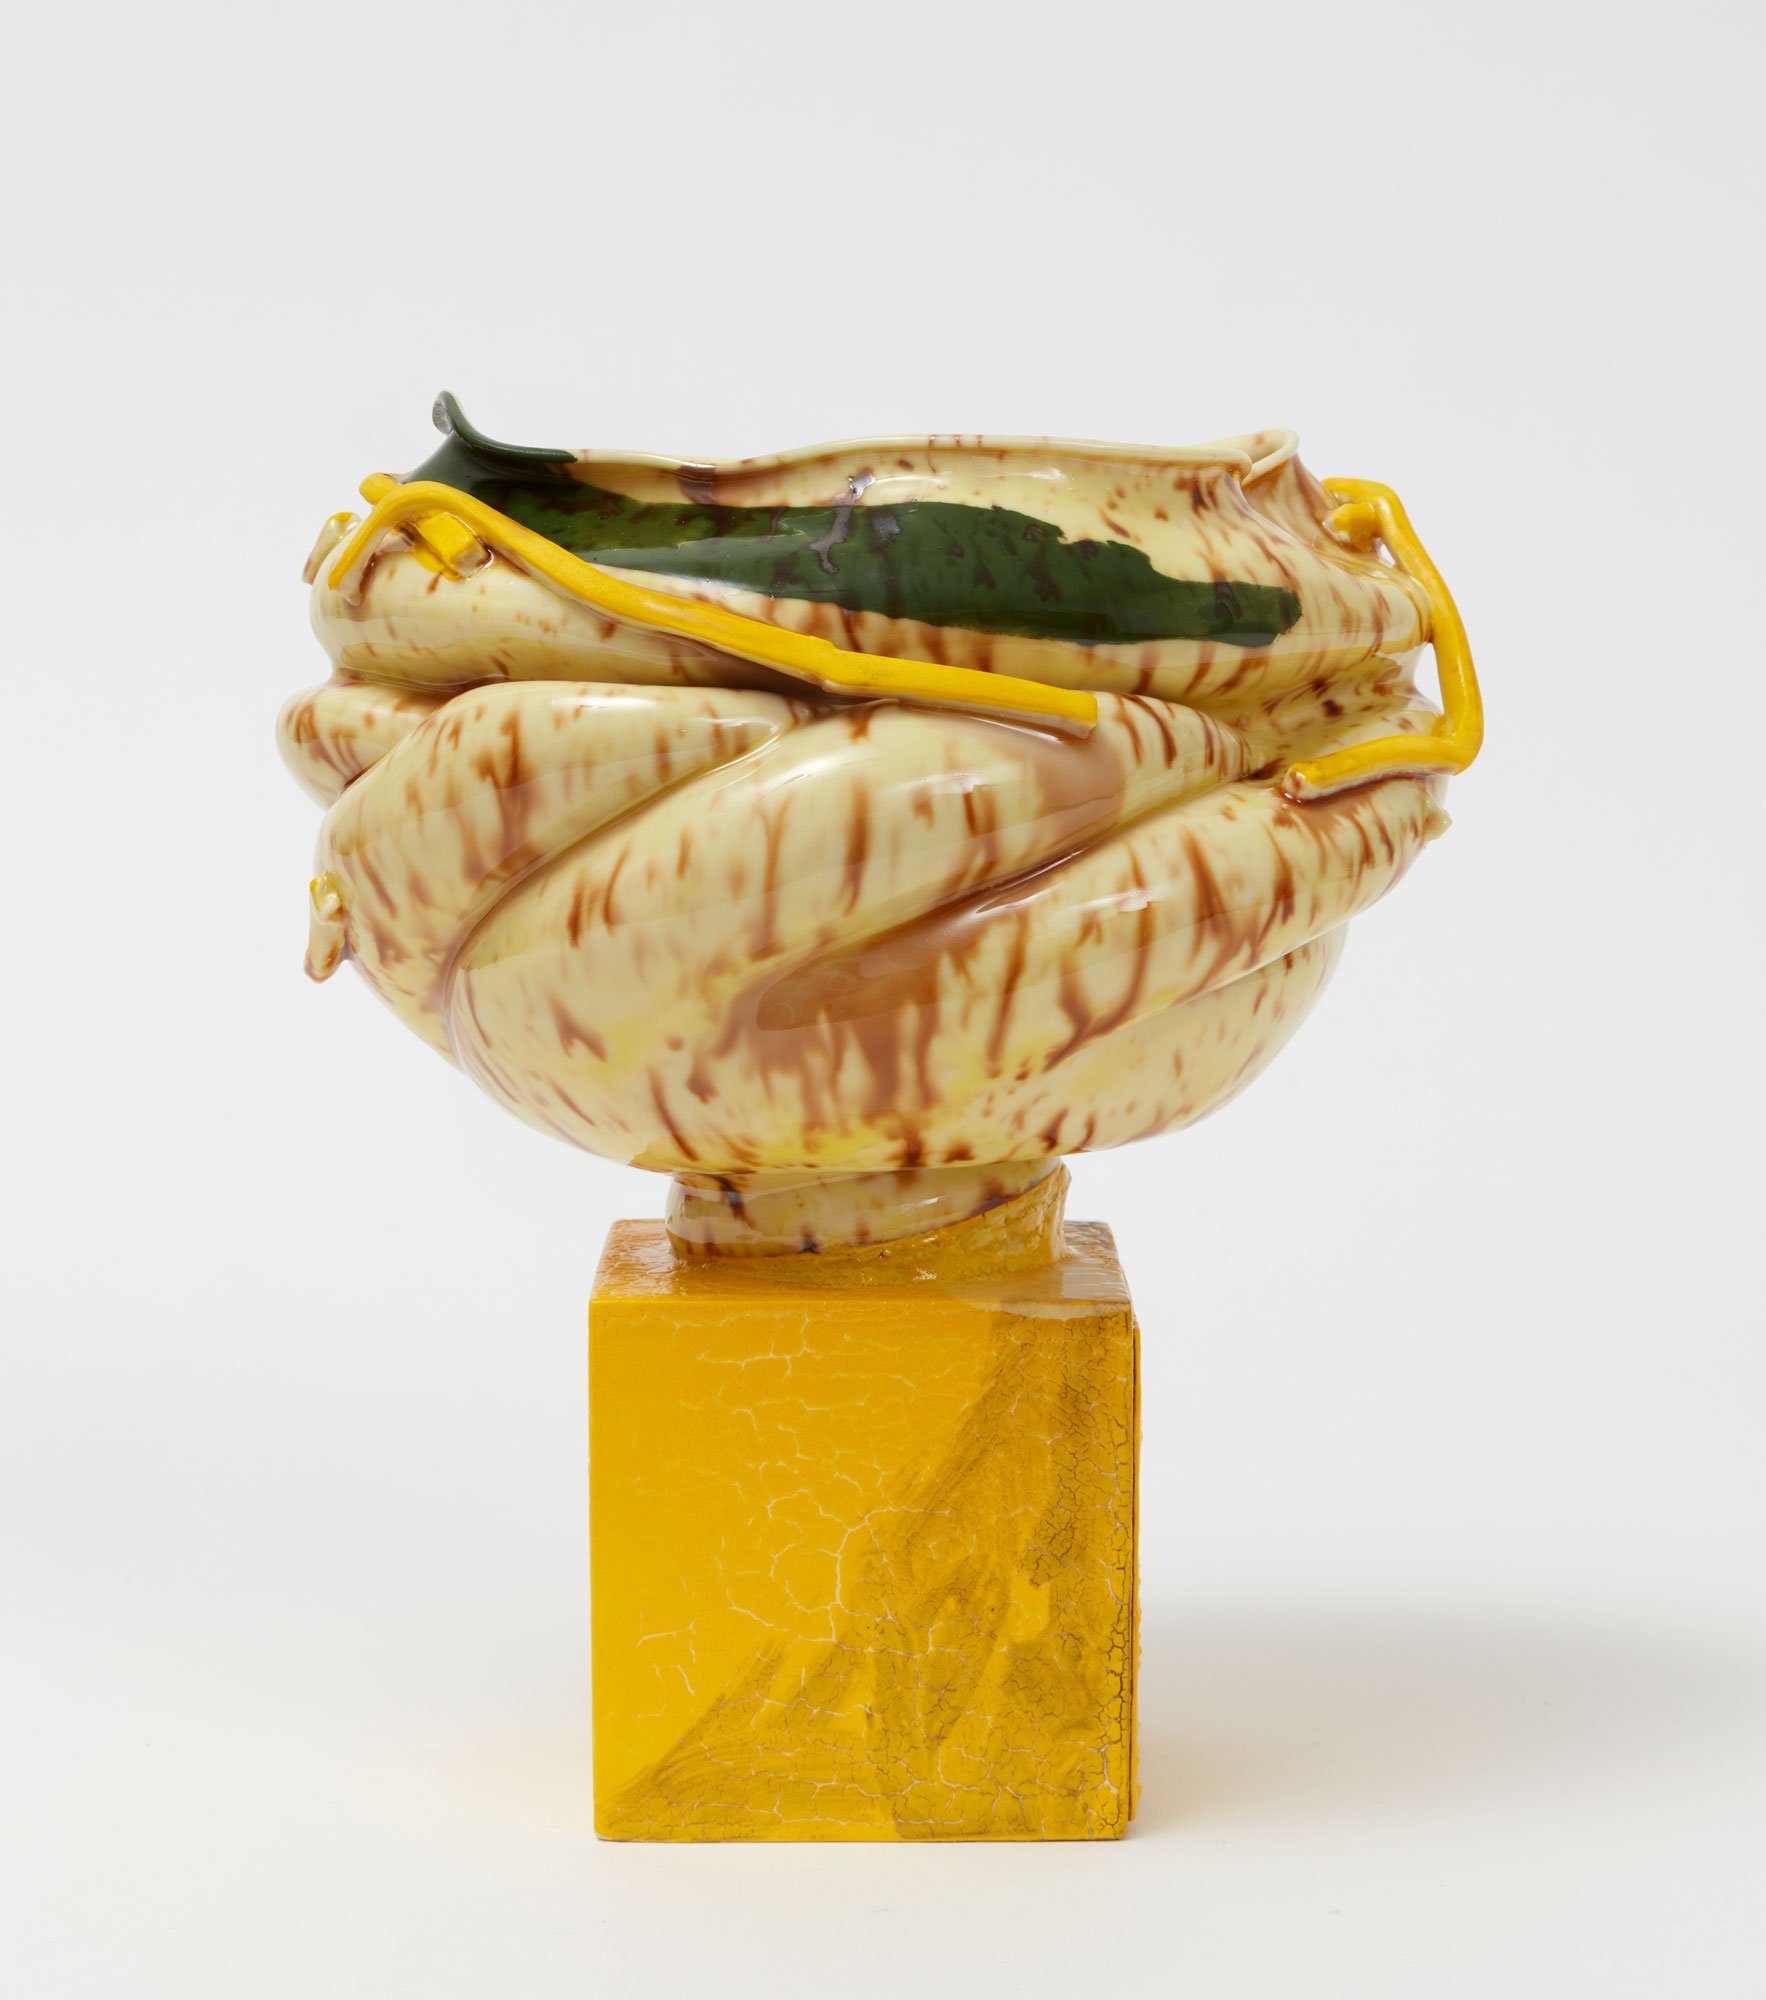  Kathy Butterly (United States, born 1963),  Yellow Build , 2021, porcelain, earthenware, glaze, 7 1/2 x 6 3/8 x 5 5/8 inches. Private collection, Boston. © Kathy Butterly. Image courtesy the artist and James Cohan, New York. Photo: Alan Wiener.  